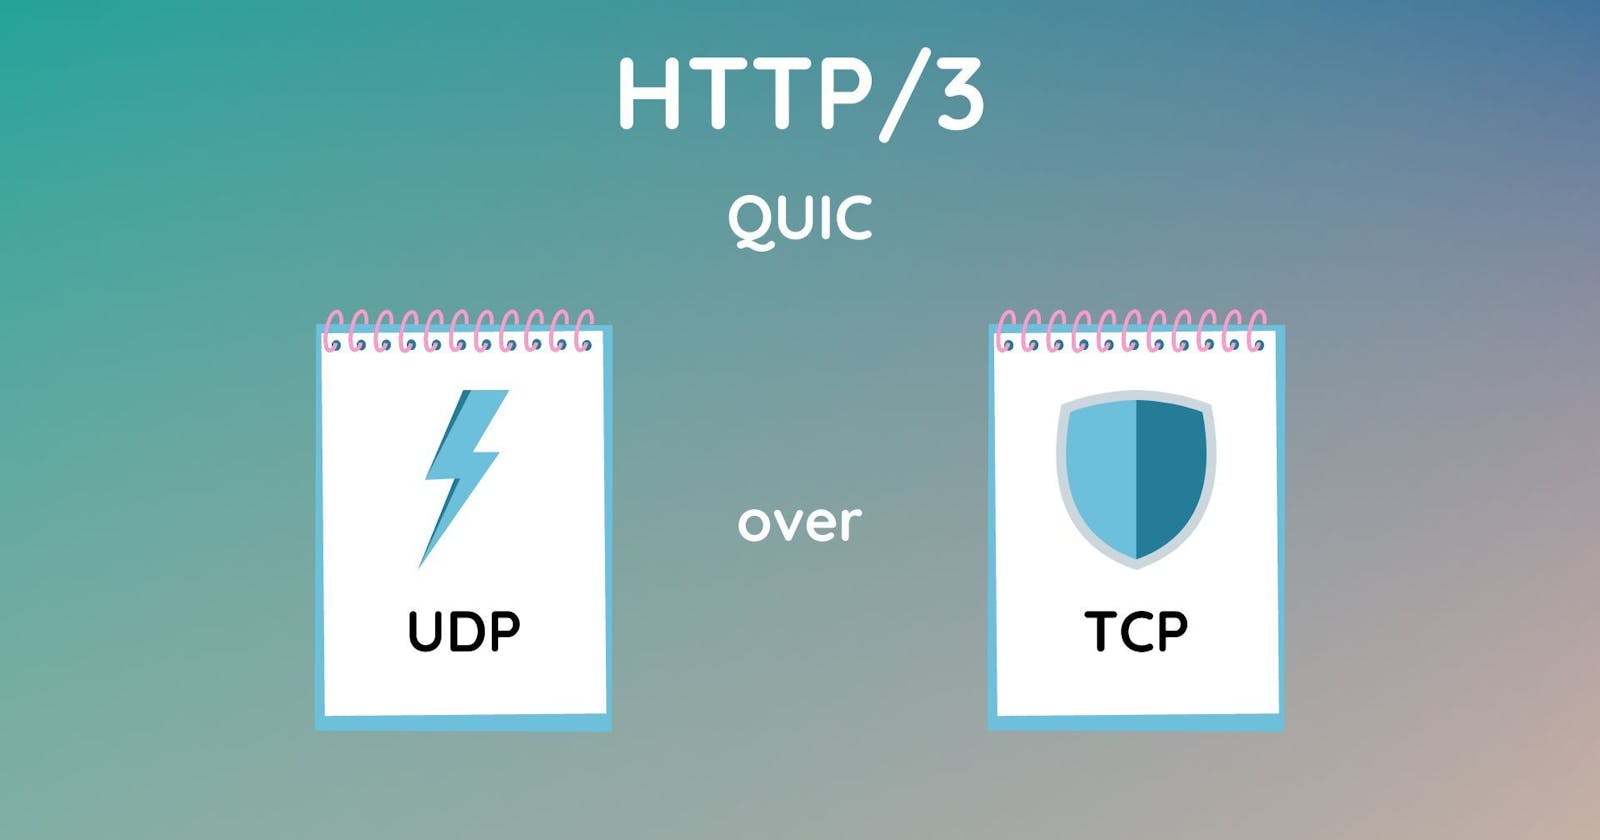 Why HTTP/3 uses UDP protocol under QUIC instead of TCP?